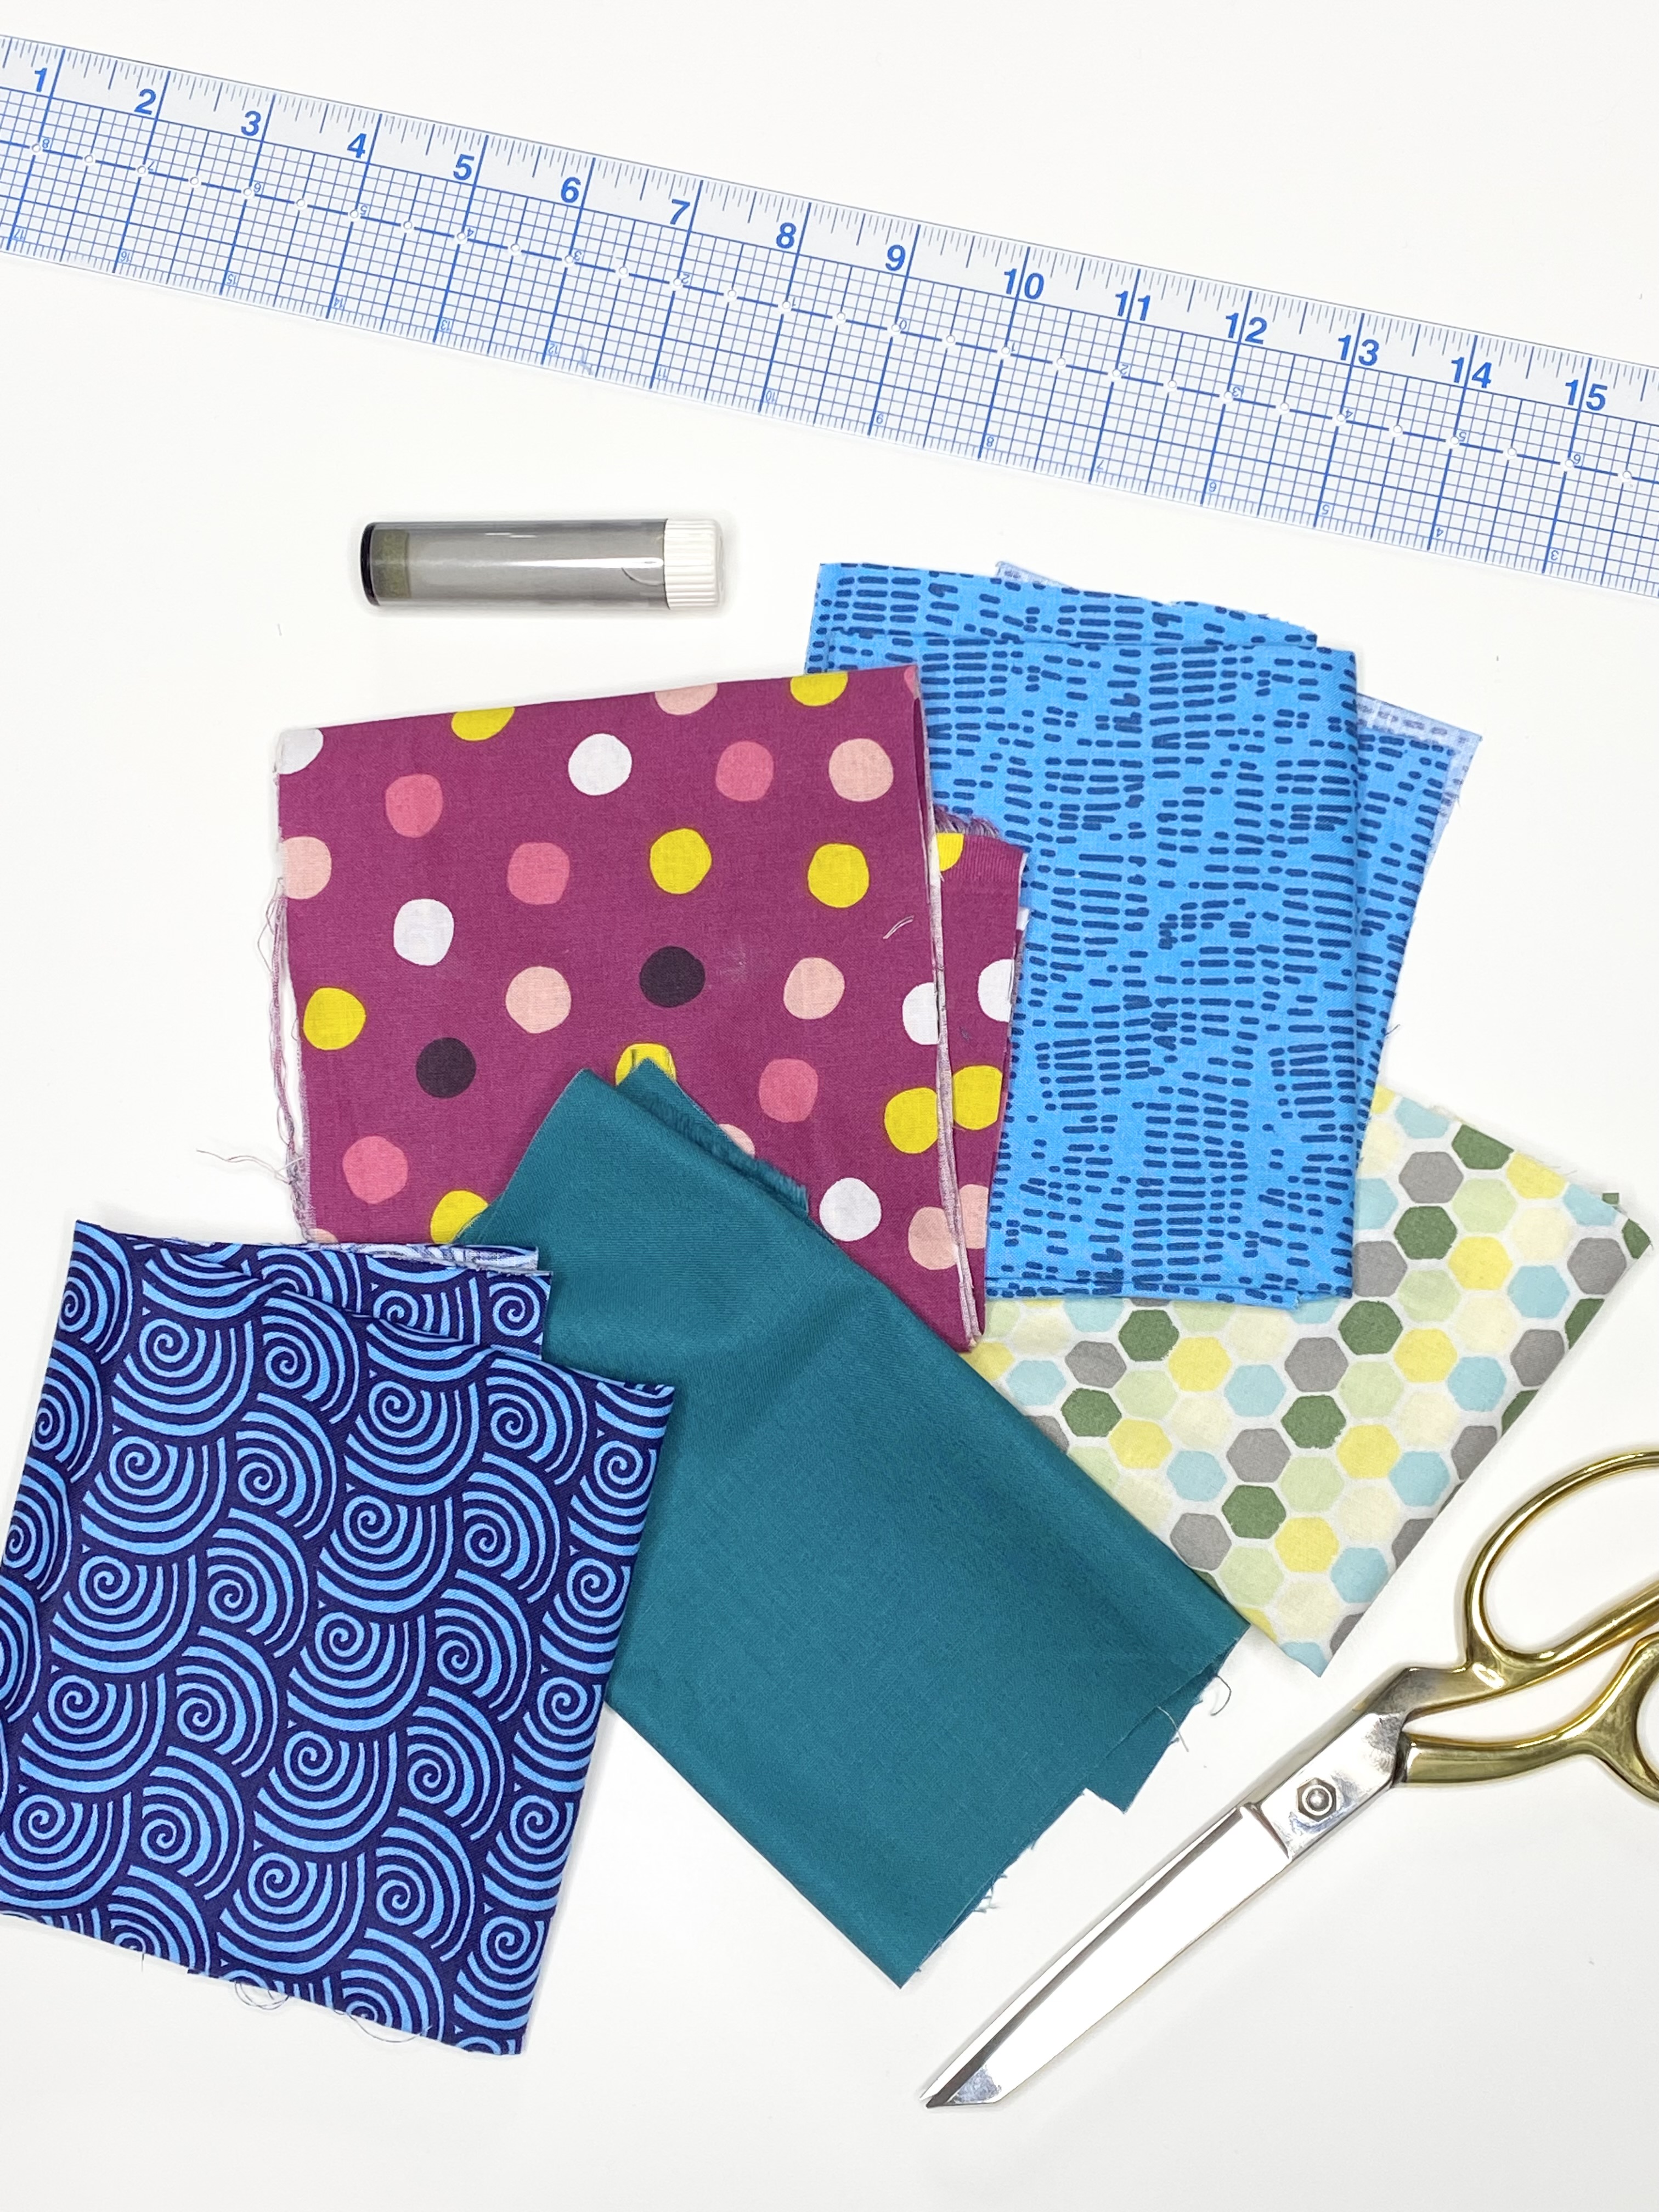 How to Make a Tissue Case with a Serger - WeAllSew